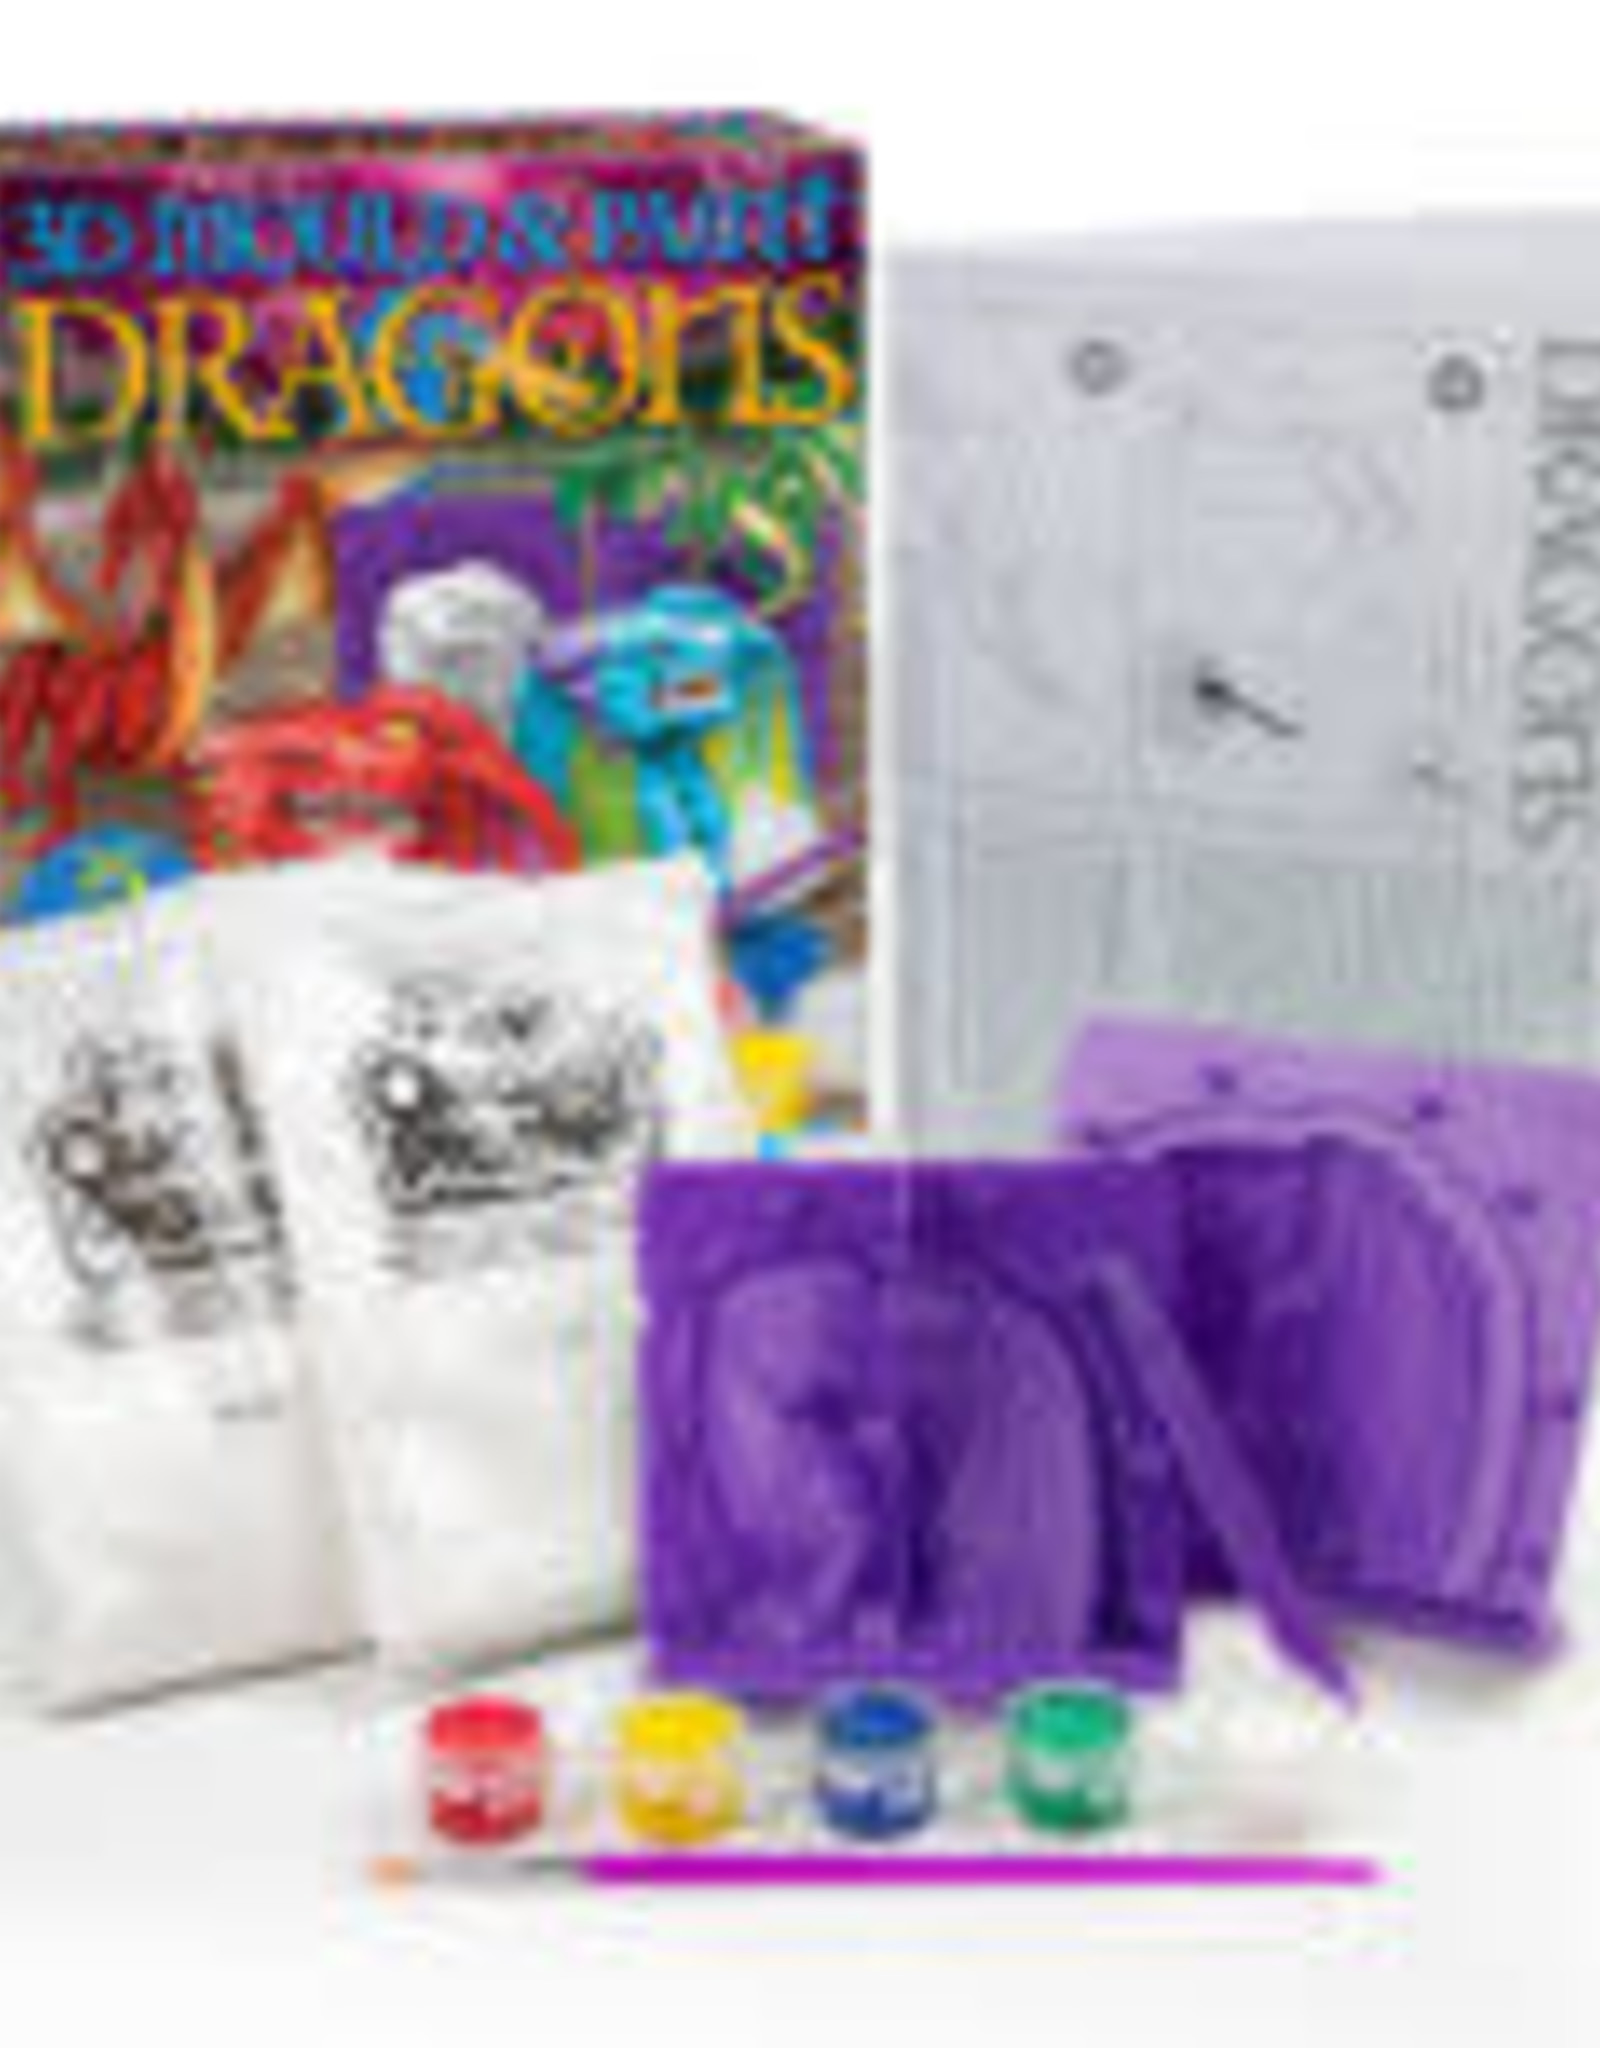 Playwell 3D Mould & Paint Dragons